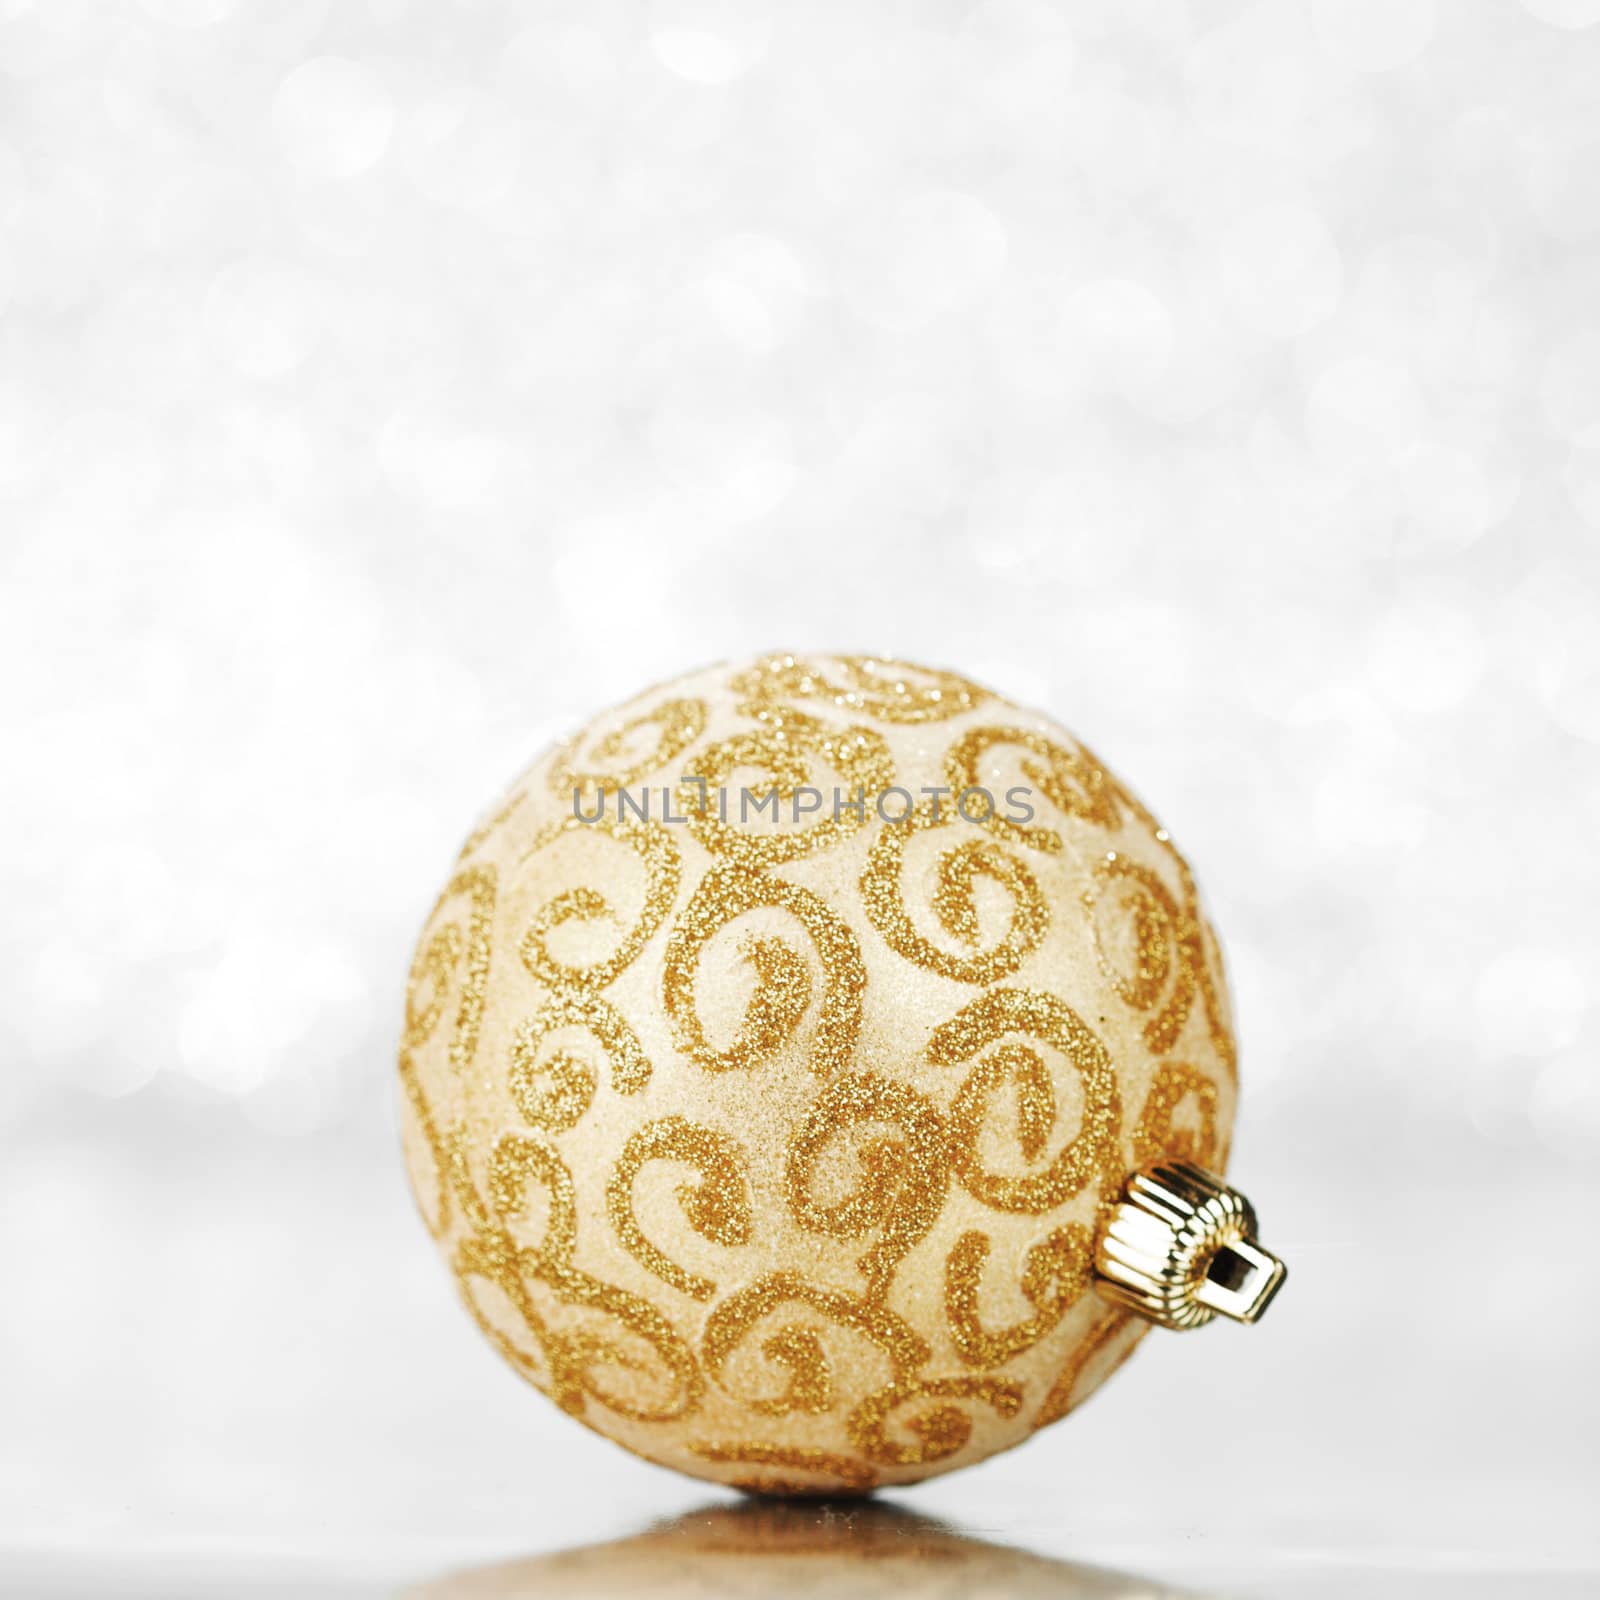 Beautiful golden christmas ball on abstract glitter background close-up